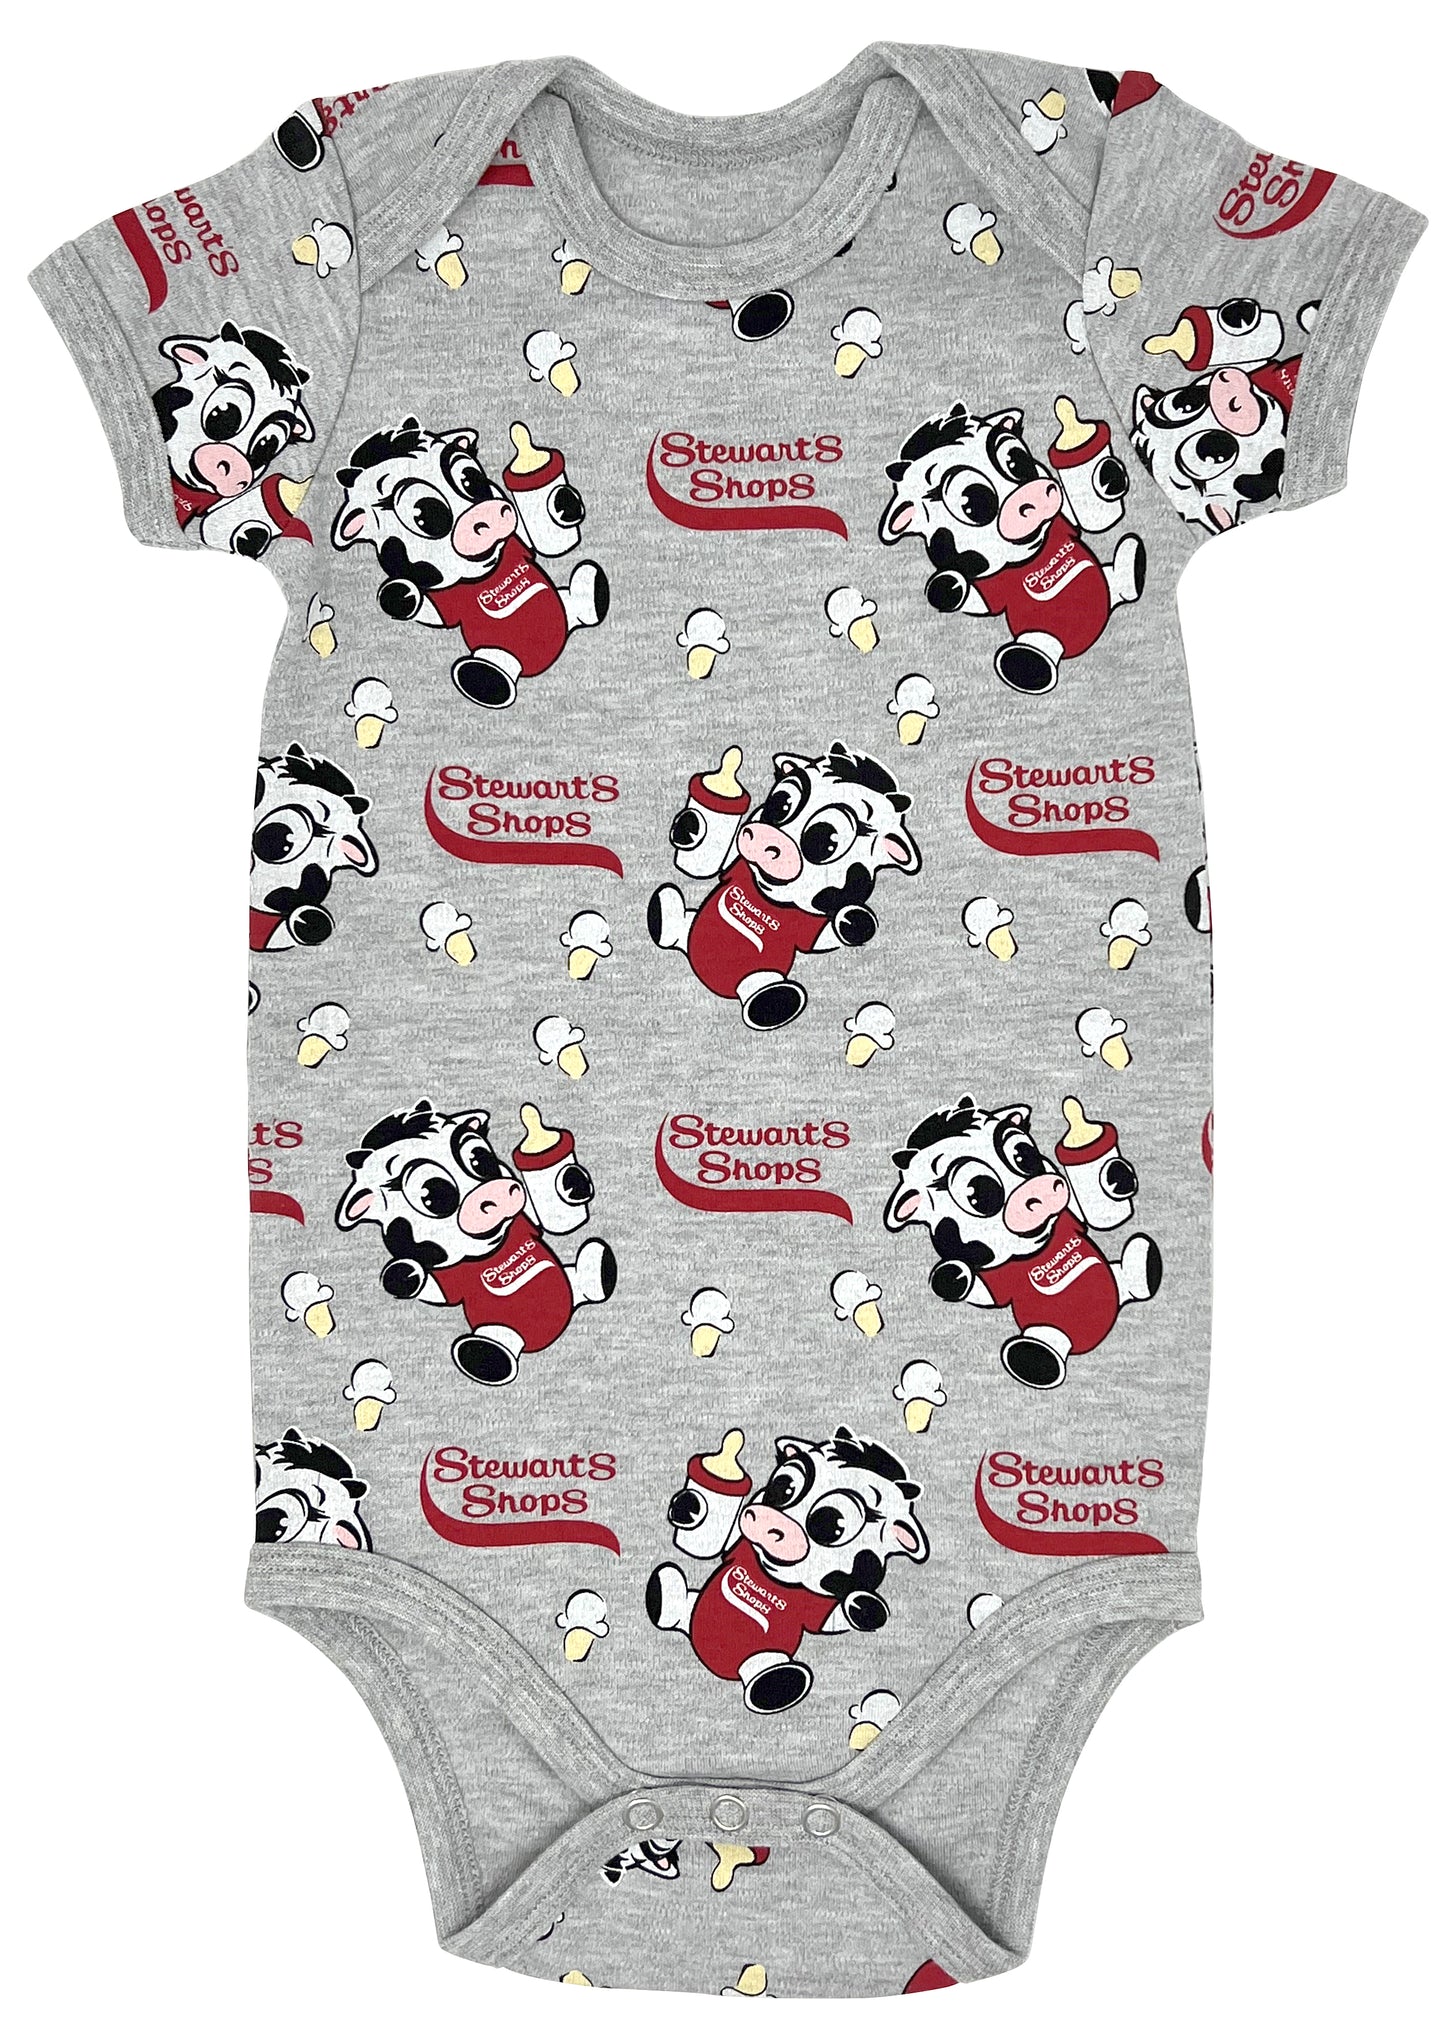 Short Sleeved baby bodysuit with the Stewarts Shop logo, baby cows holding a bottle, and ice cream cones 